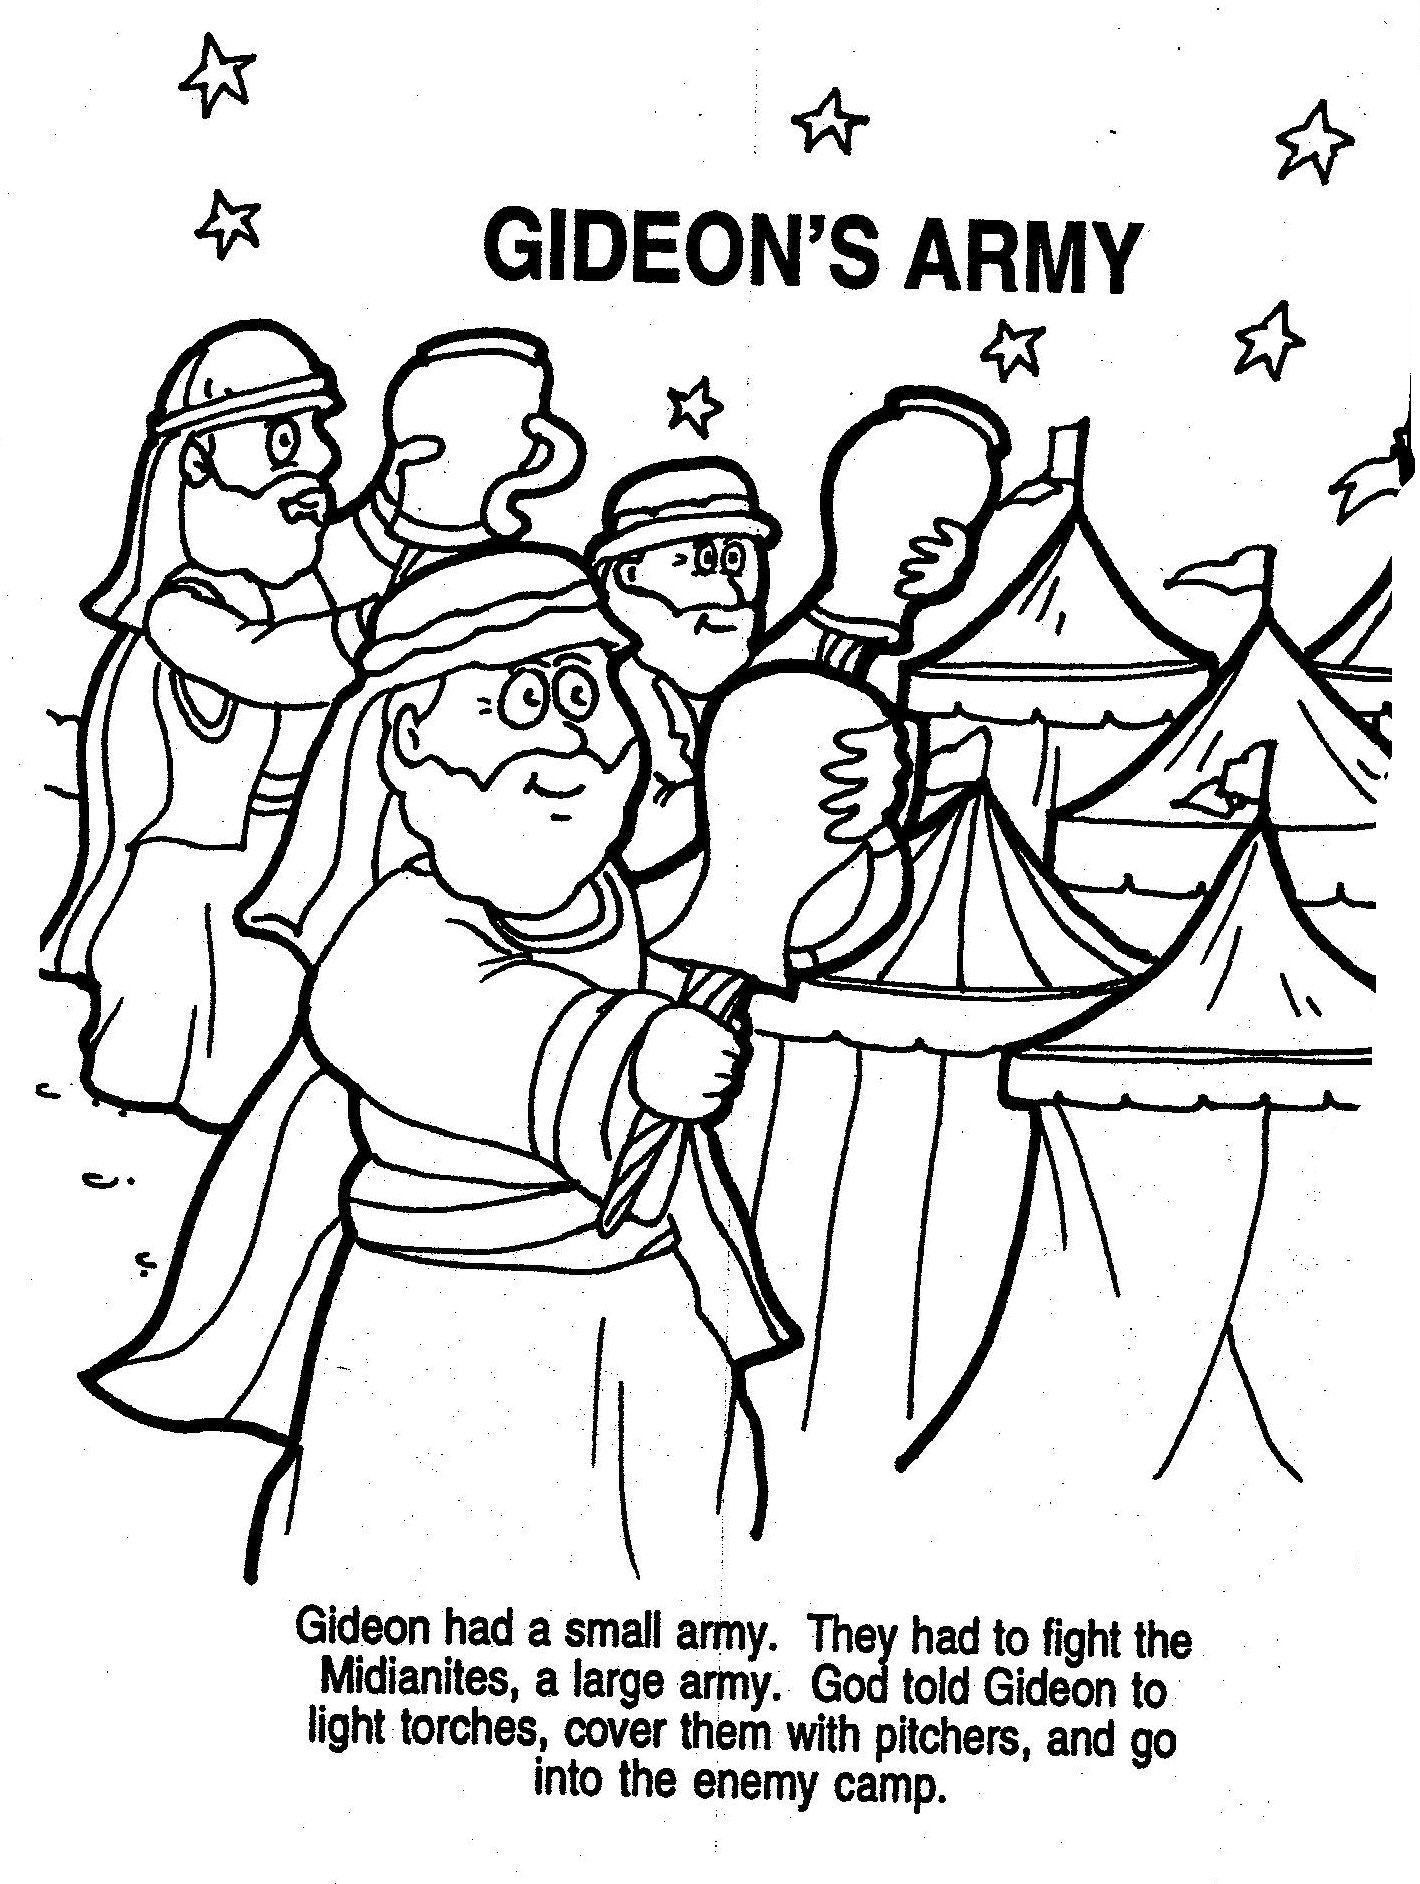 Children Bible Story Coloring Pages
 Coloring Pages for children is a wonderful activity that